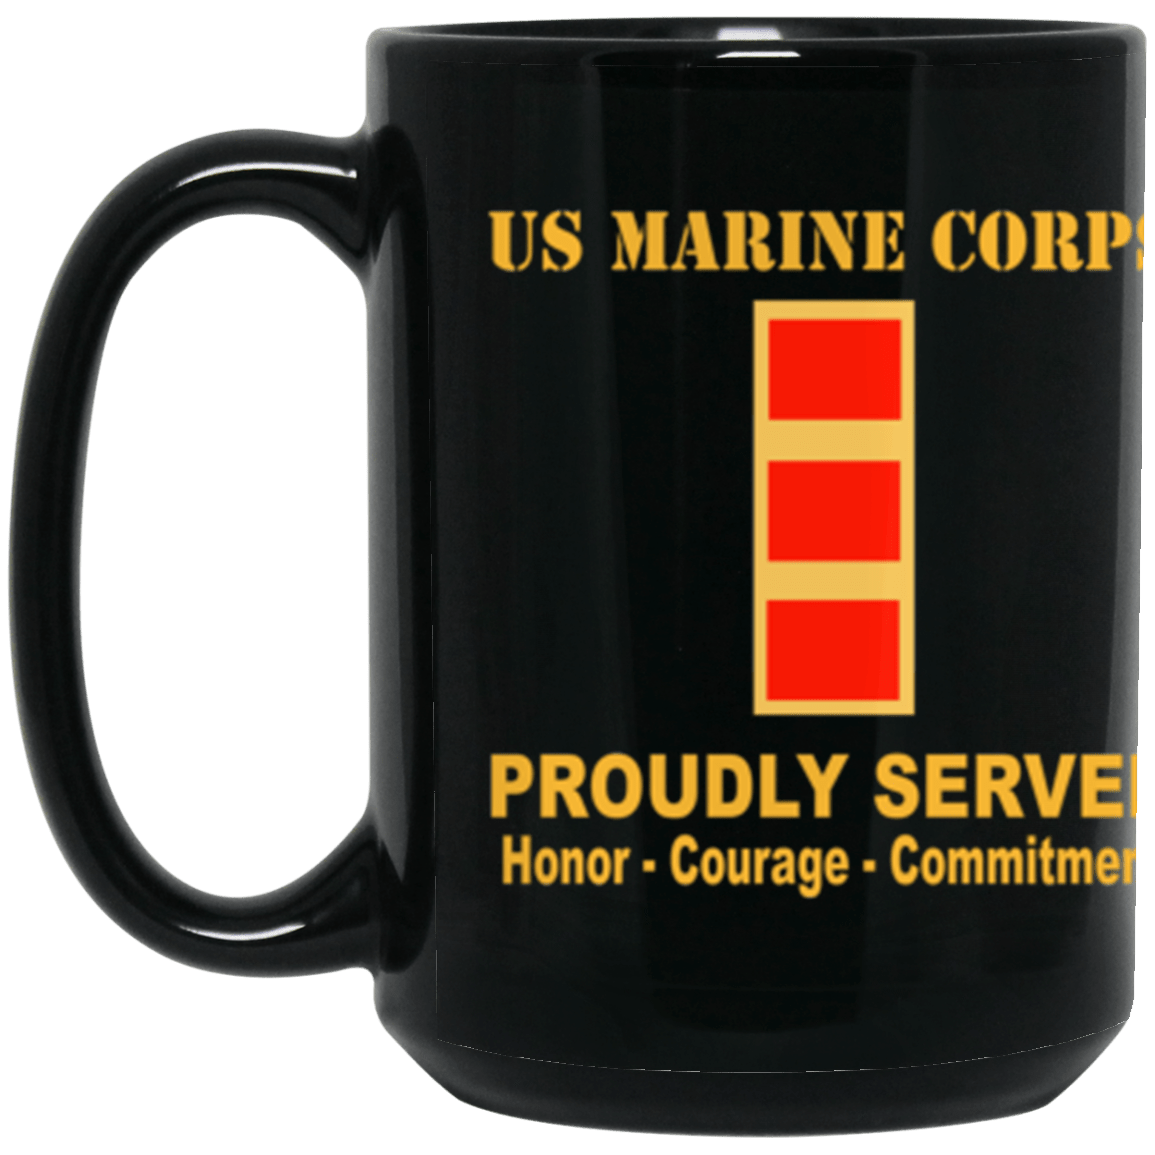 USMC W-2 Chief Warrant Officer 2 CW2 CW2 Warrant Officer Ranks Proudly Served Core Values 15 oz. Black Mug